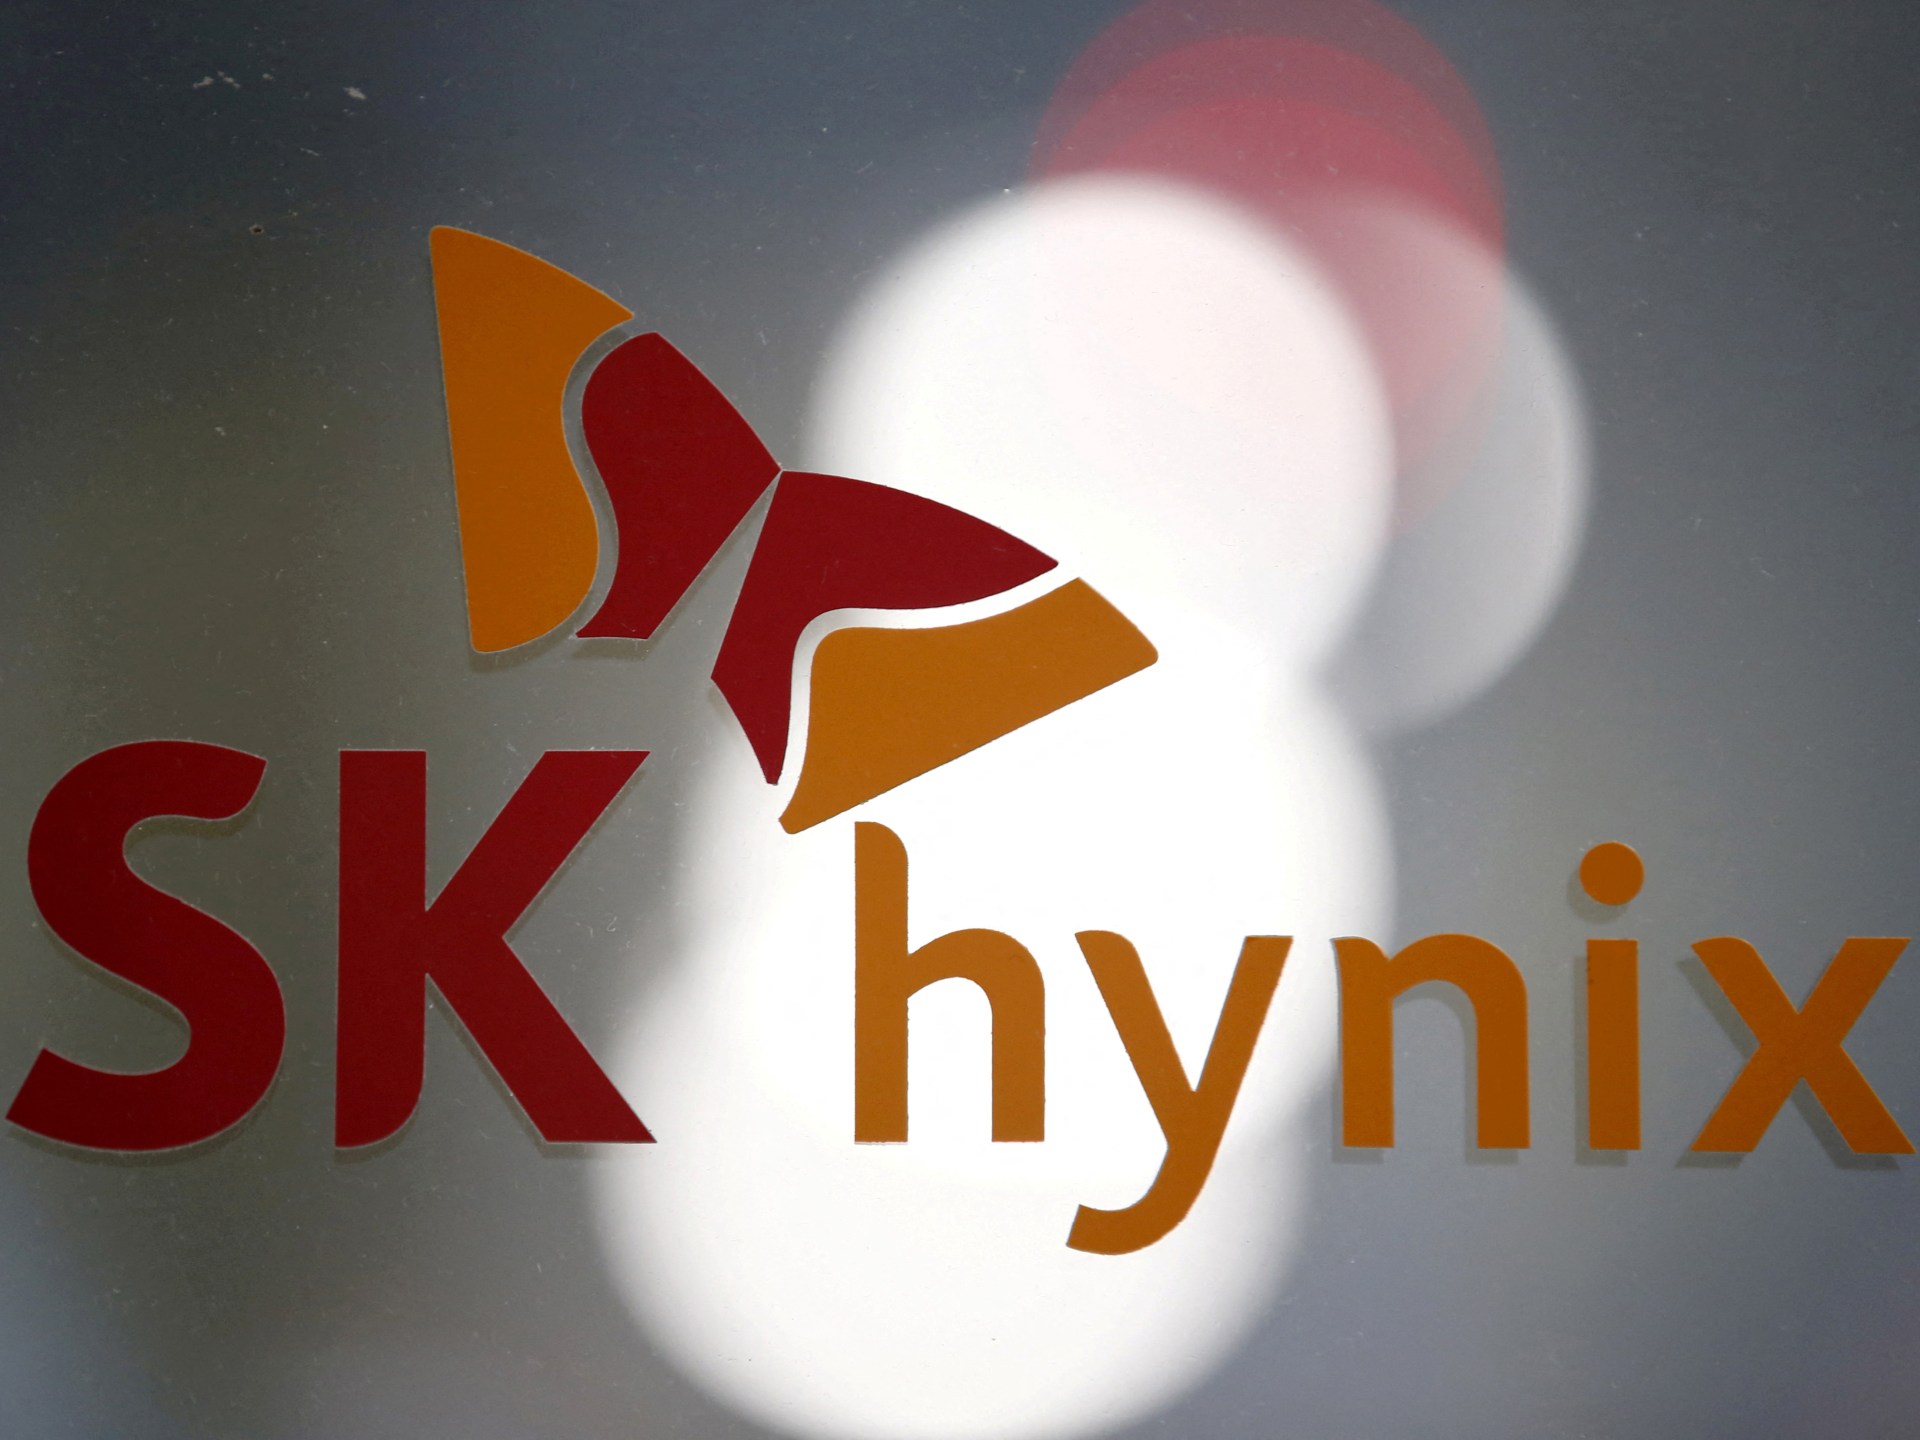 South Korea’s SK Hynix to release US chip plant in 2023: Assets | Generation